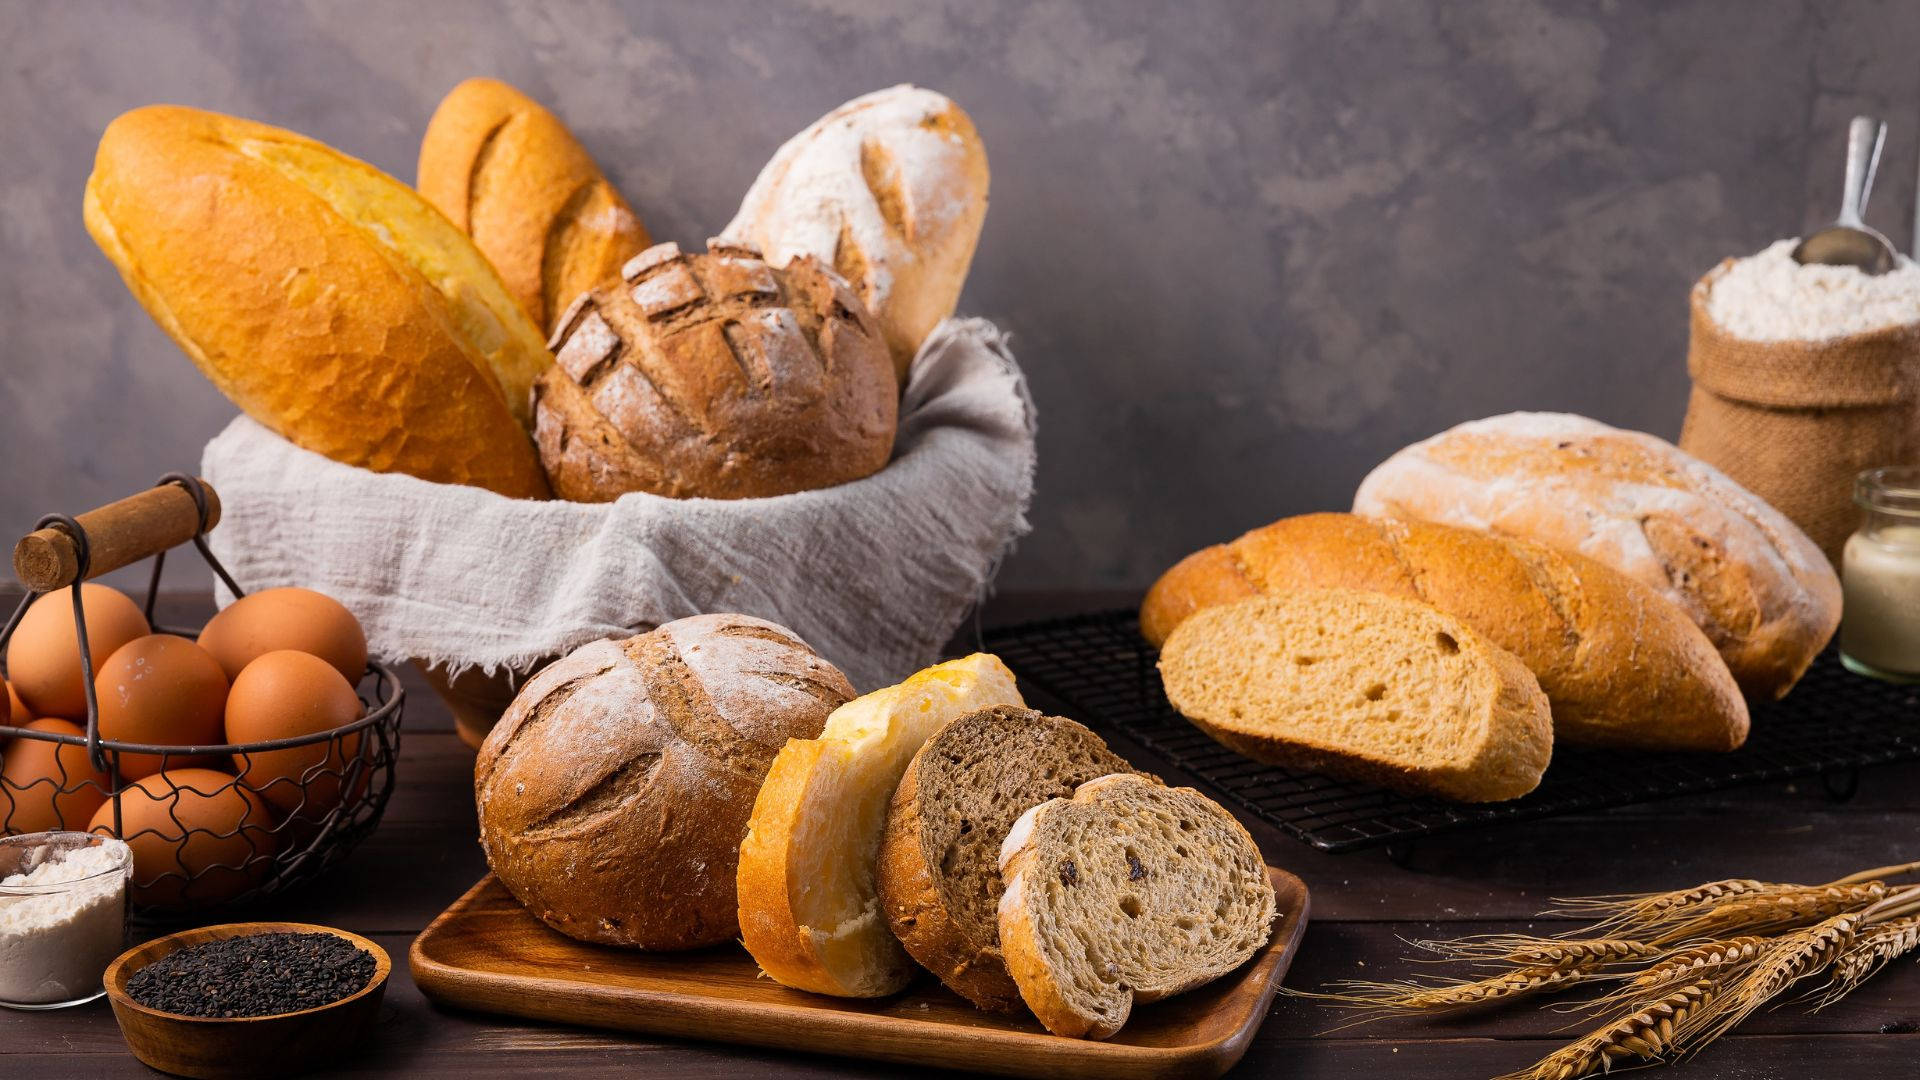 Breads With Eggs, Flour, And Wheat Background